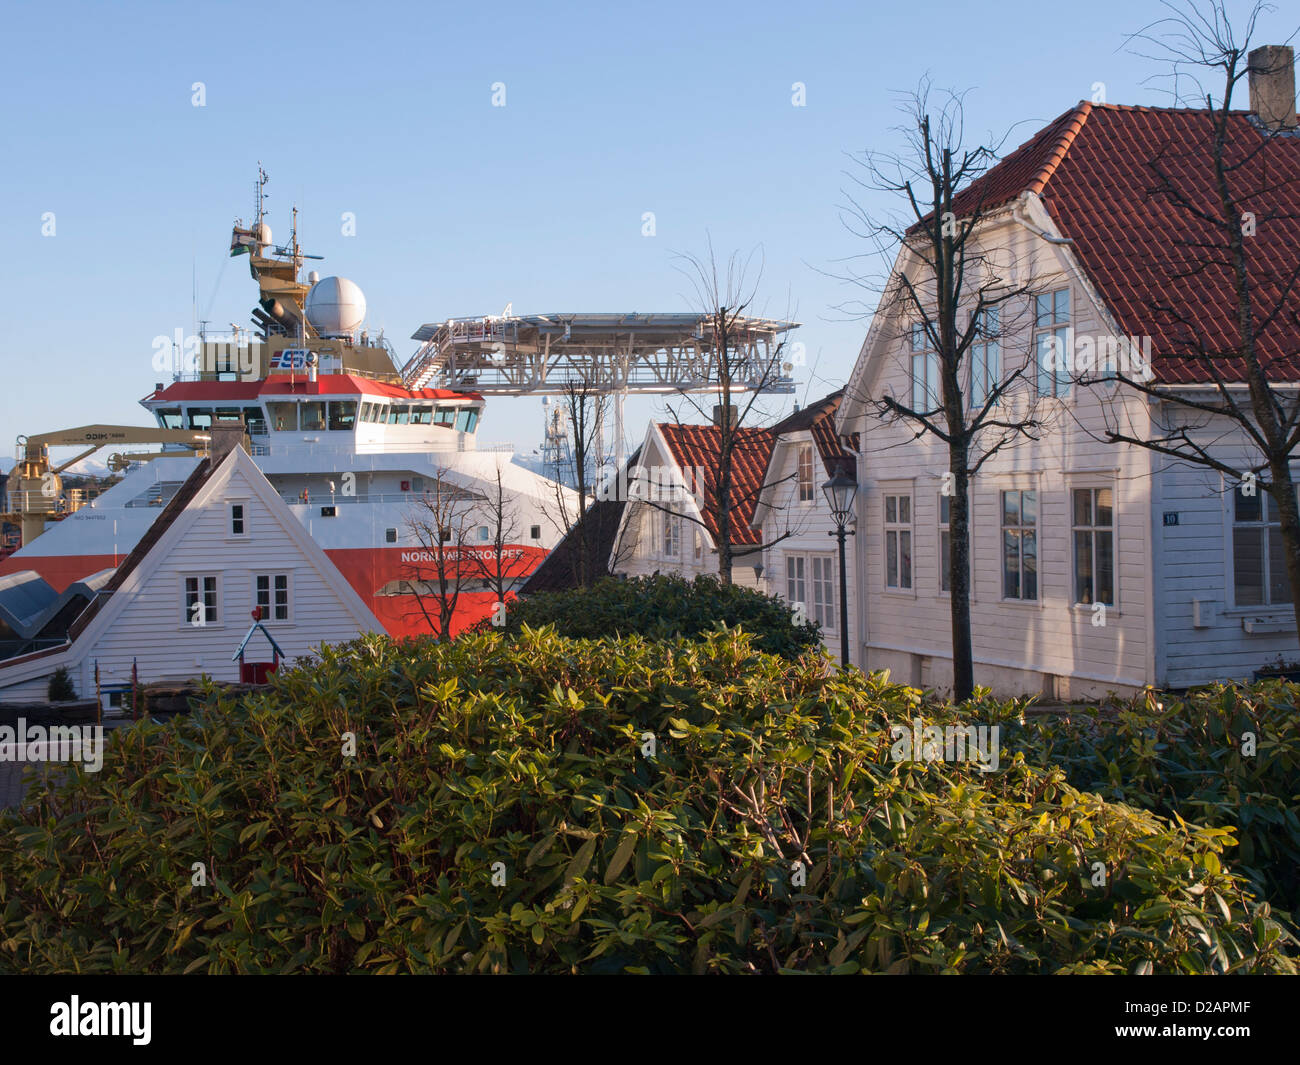 Rhododendron bushes and wooden houses in Old Stavanger  Norway. Harbour with oil industry supply ship can be seen below Stock Photo